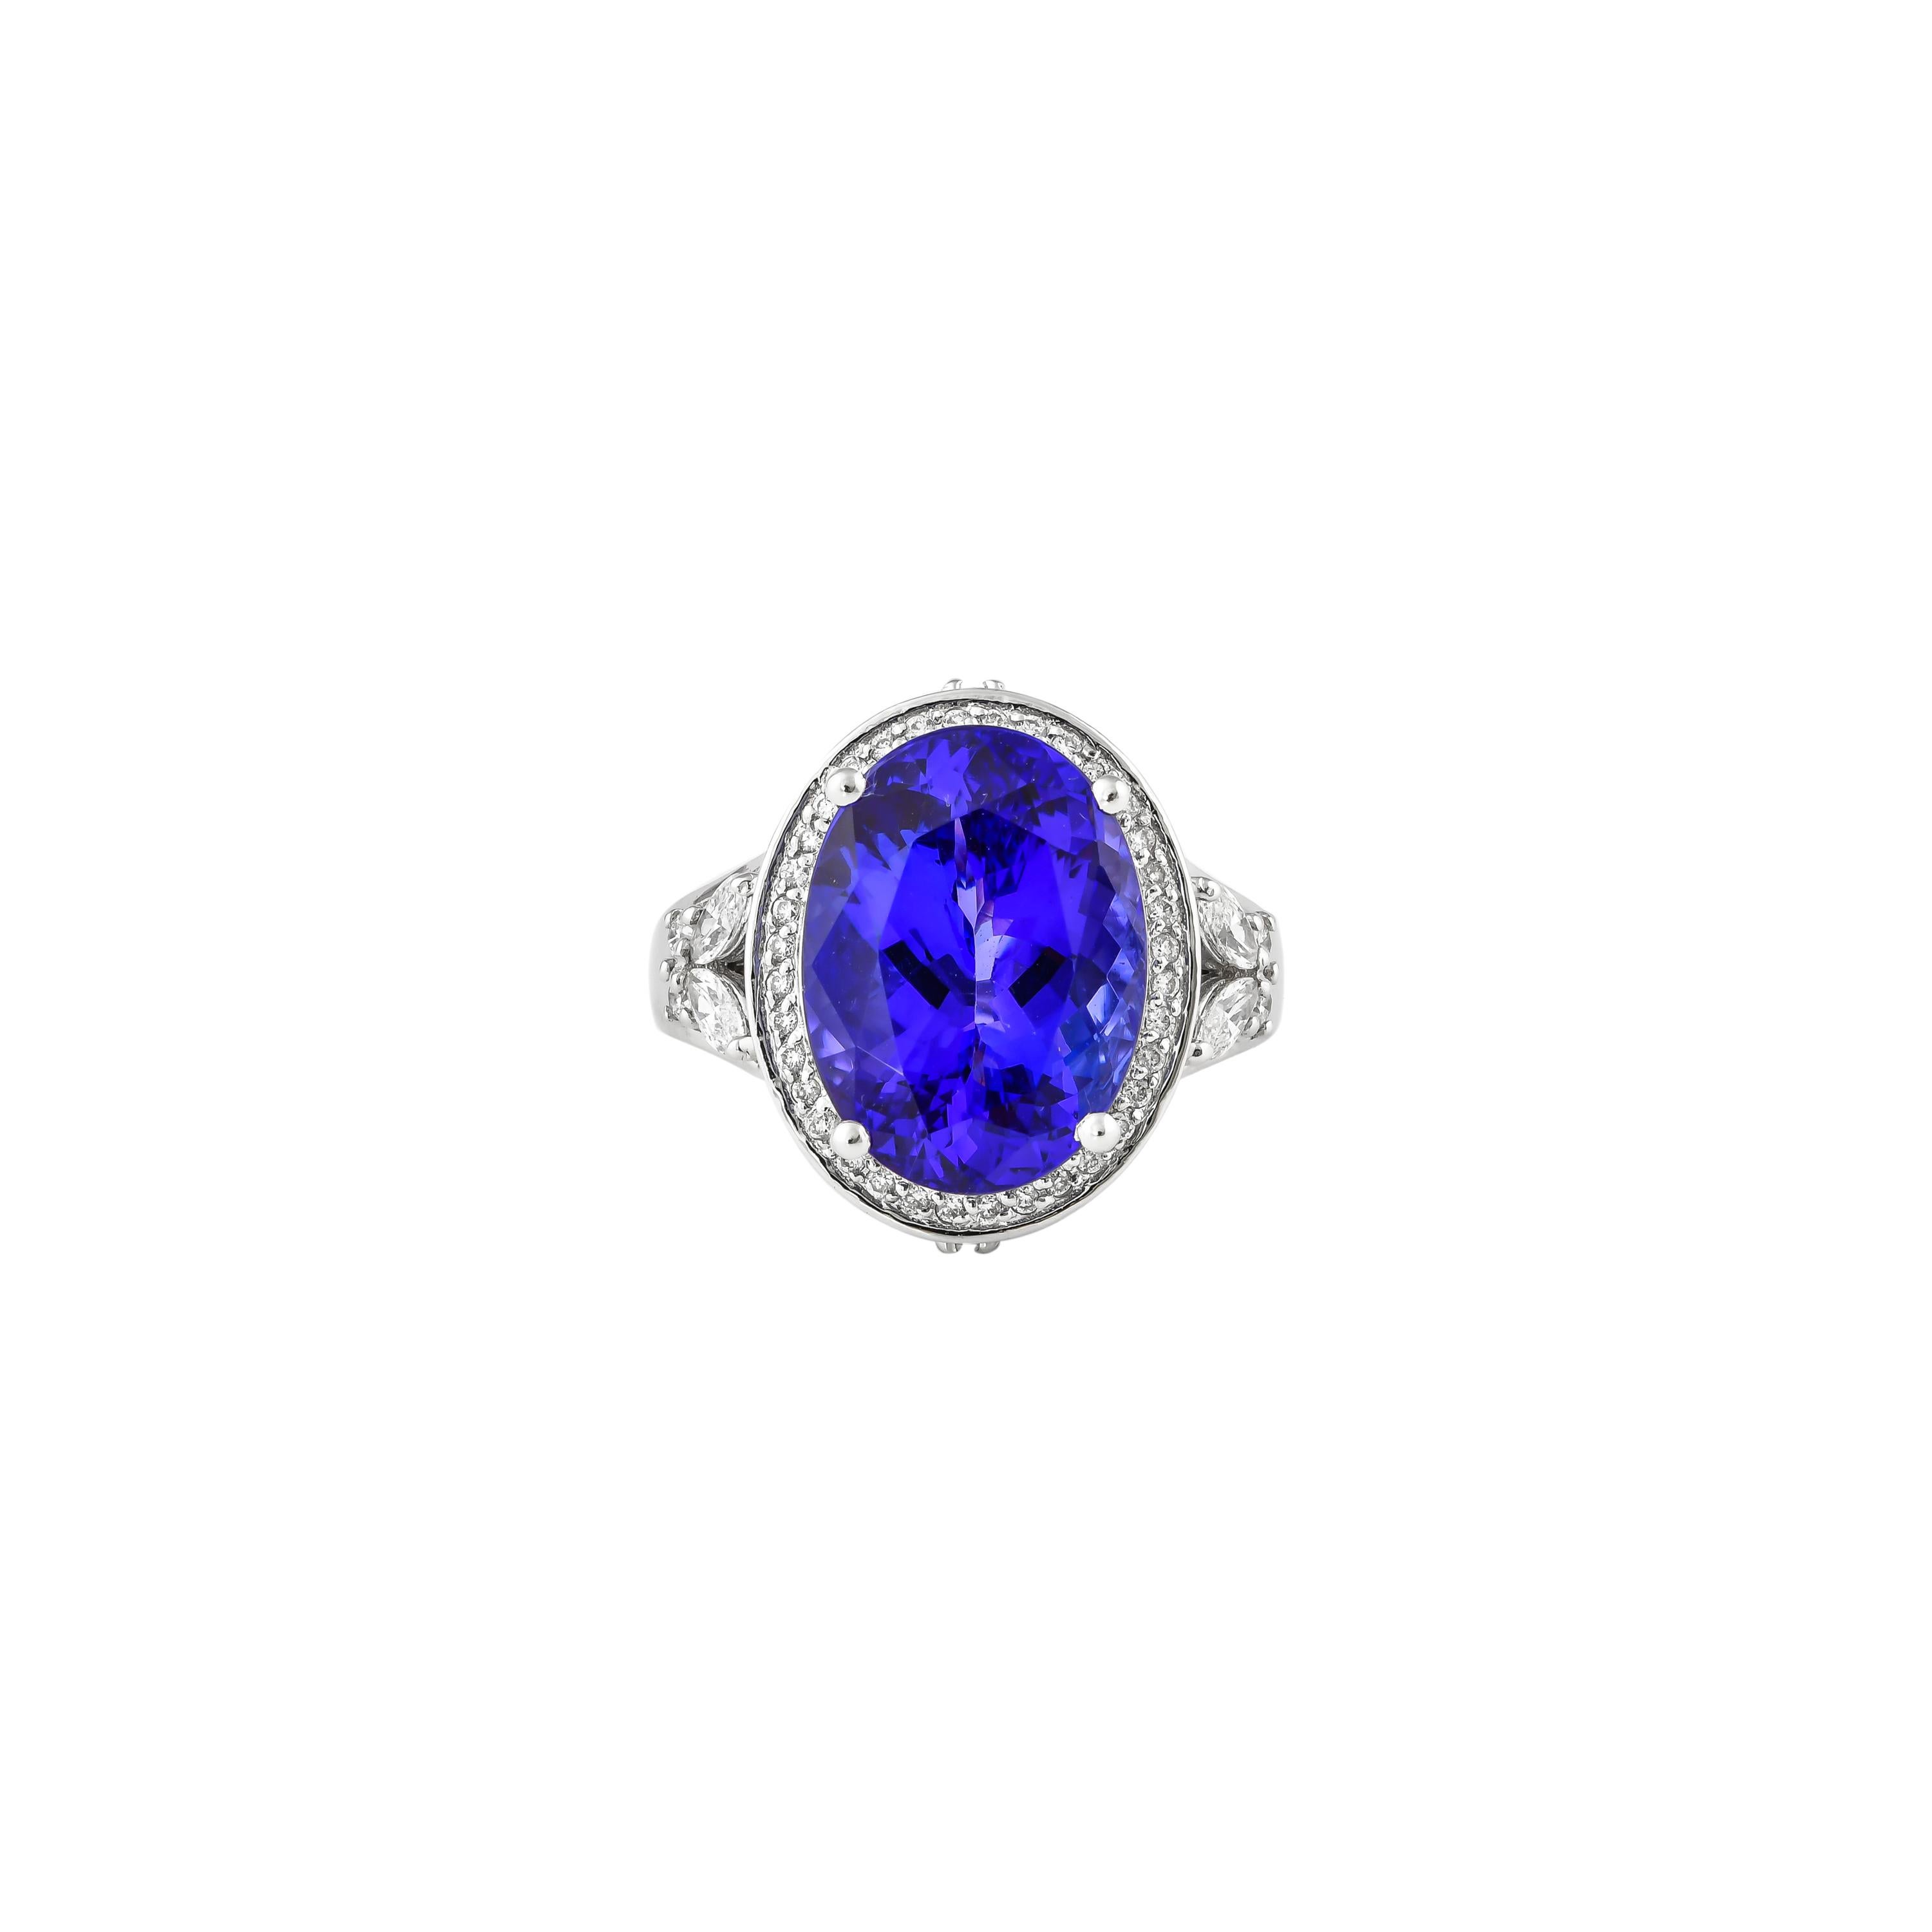 Oval Cut 9.0 Carat Tanzanite and White Diamond Ring in 18 Karat White Gold For Sale